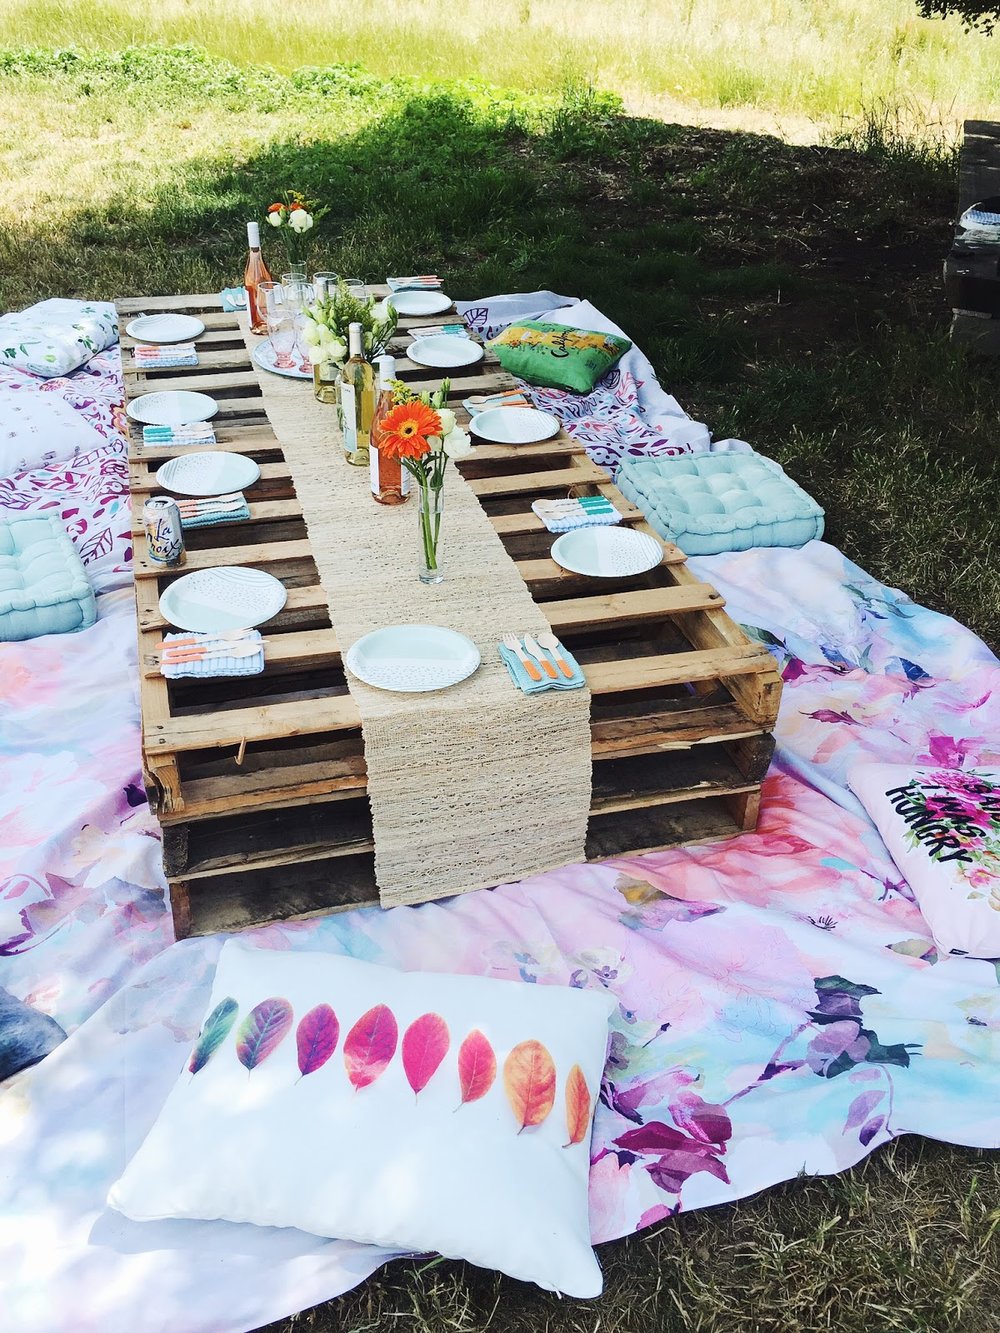 pinterest picnic idea, outdoor pillow picnic, society6 tapestries, palettes for picnic